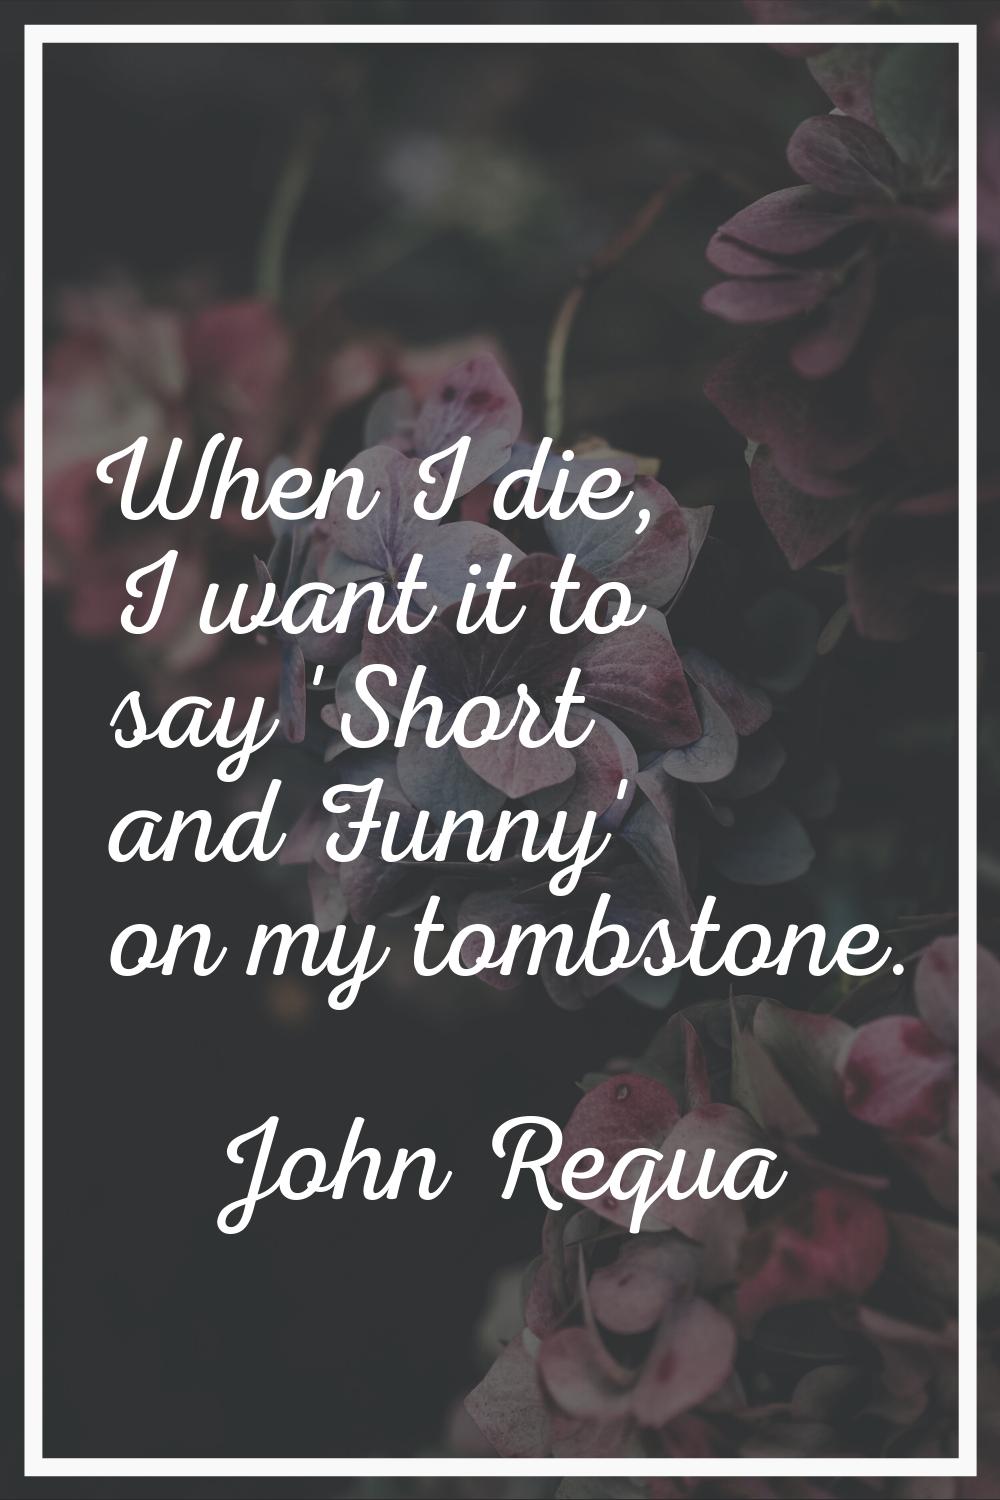 When I die, I want it to say 'Short and Funny' on my tombstone.